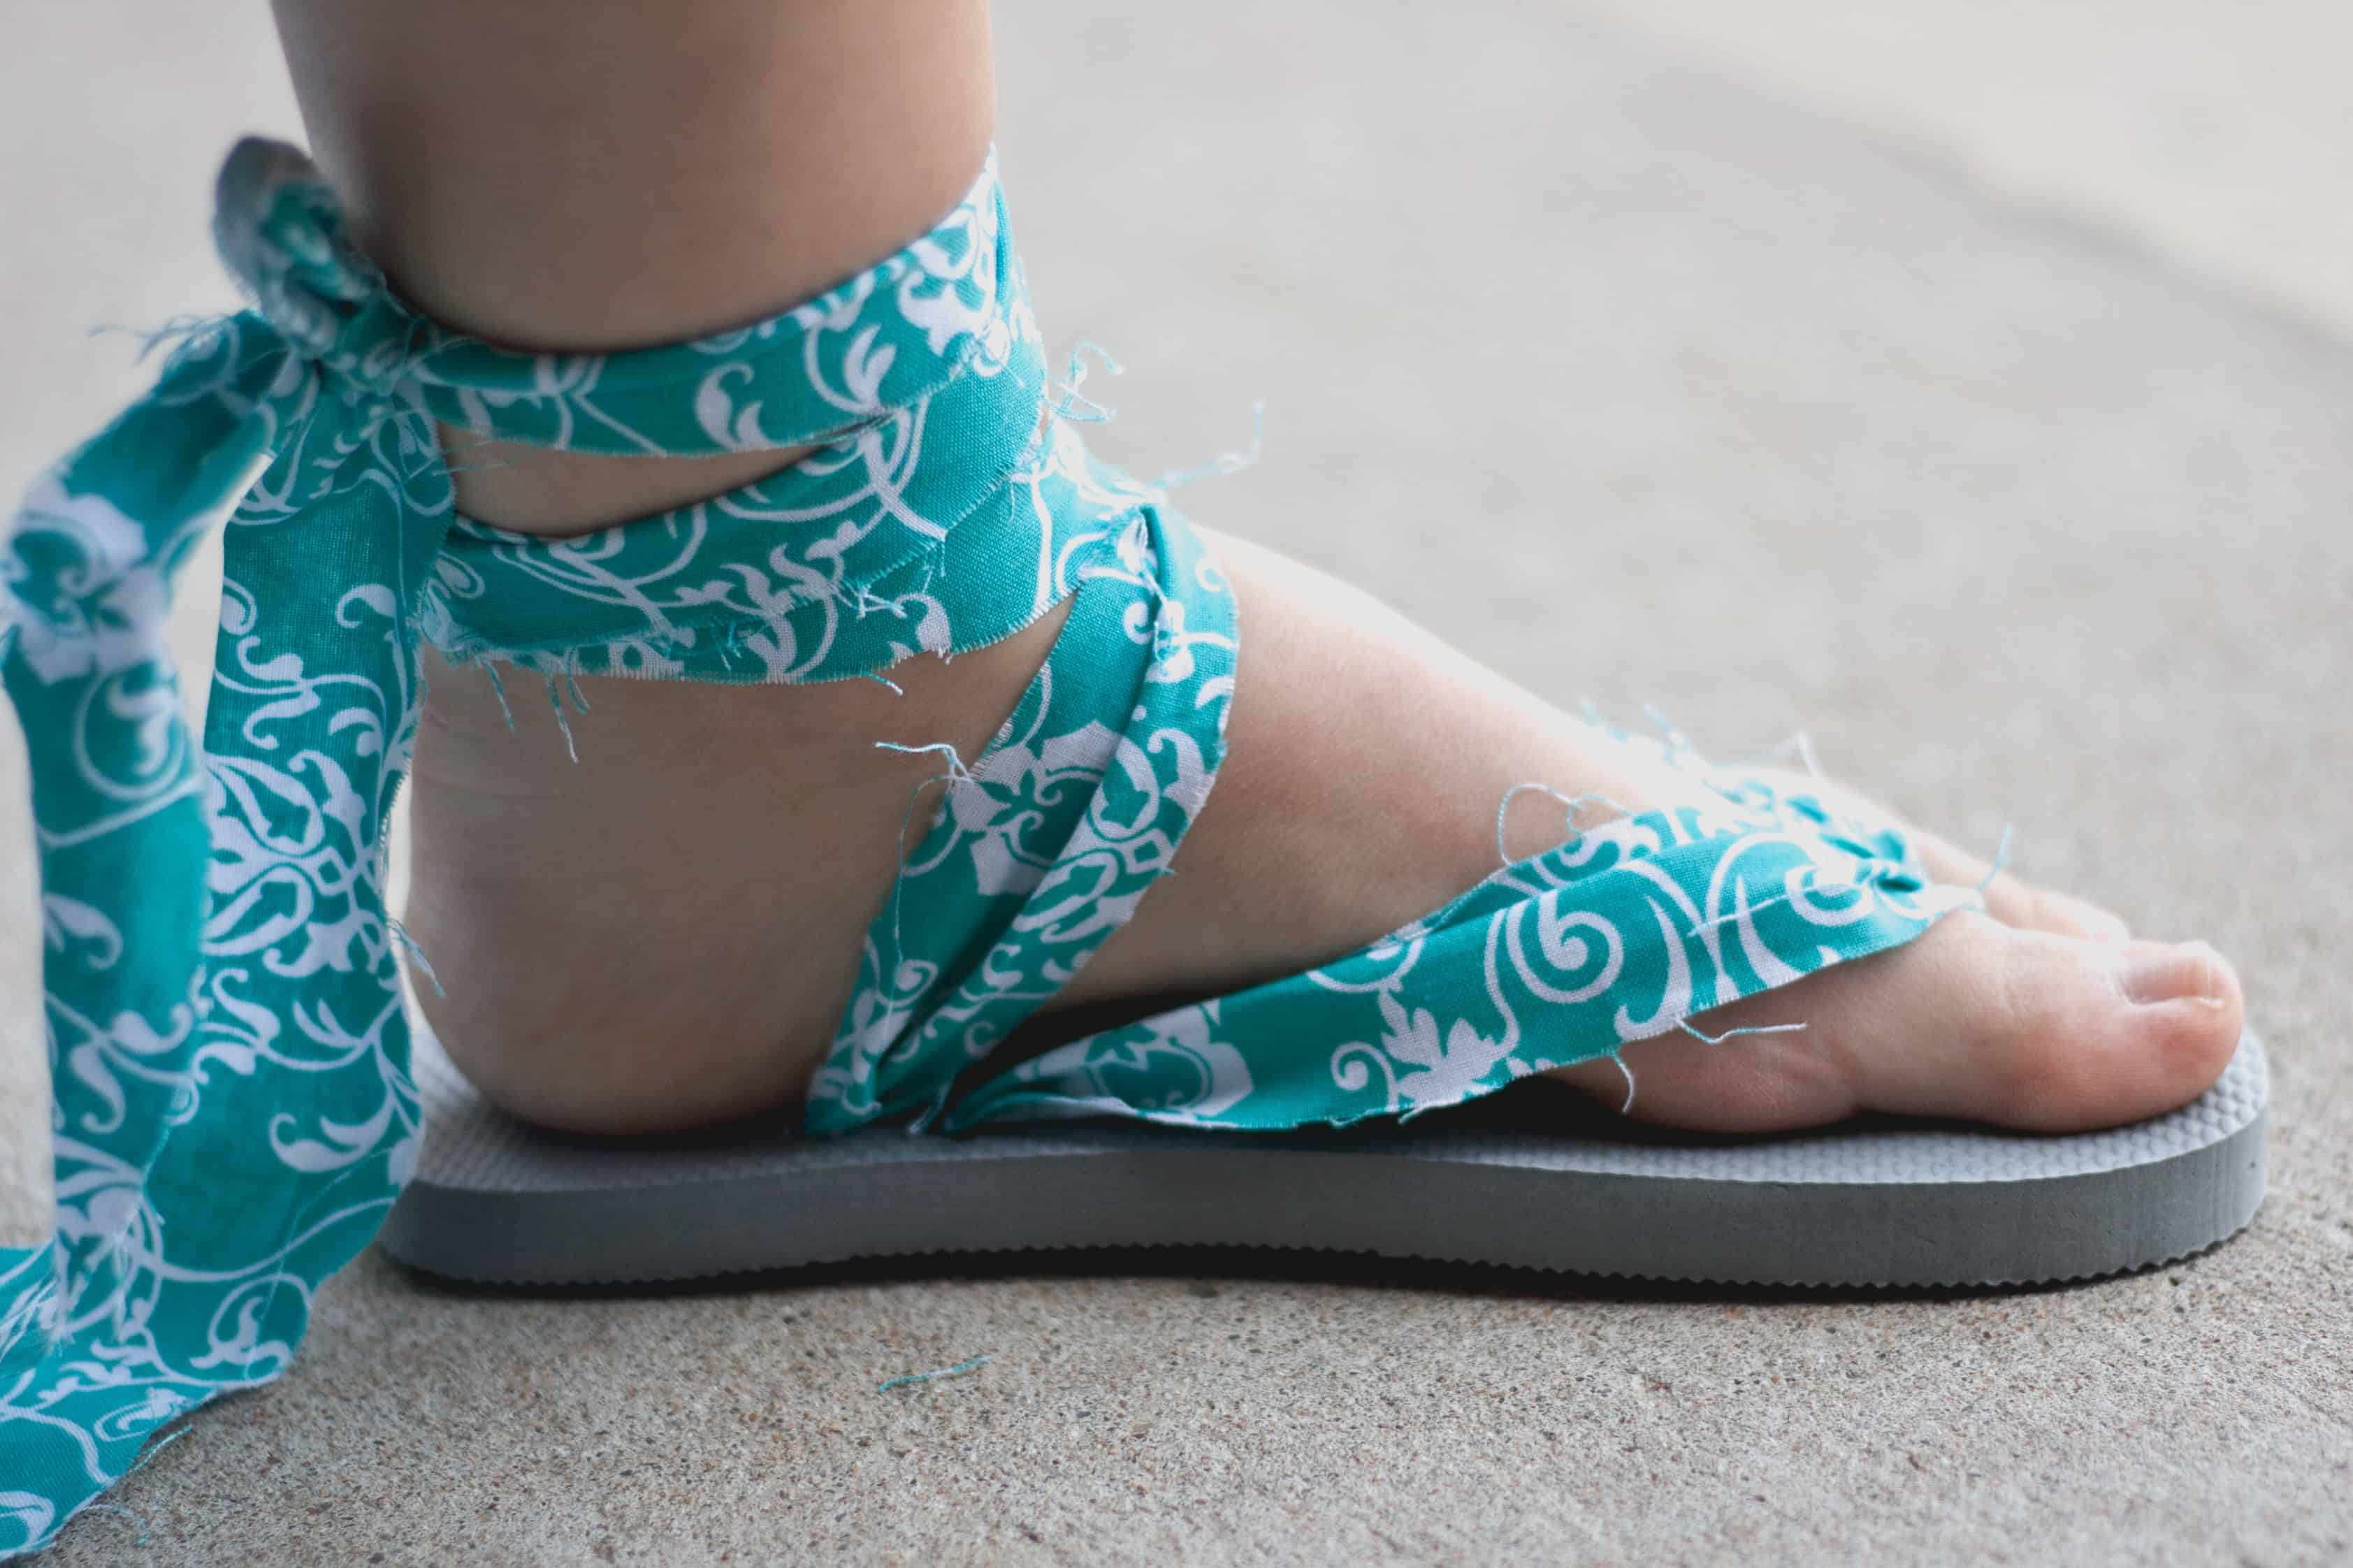 Wrapping fabric strap sandals